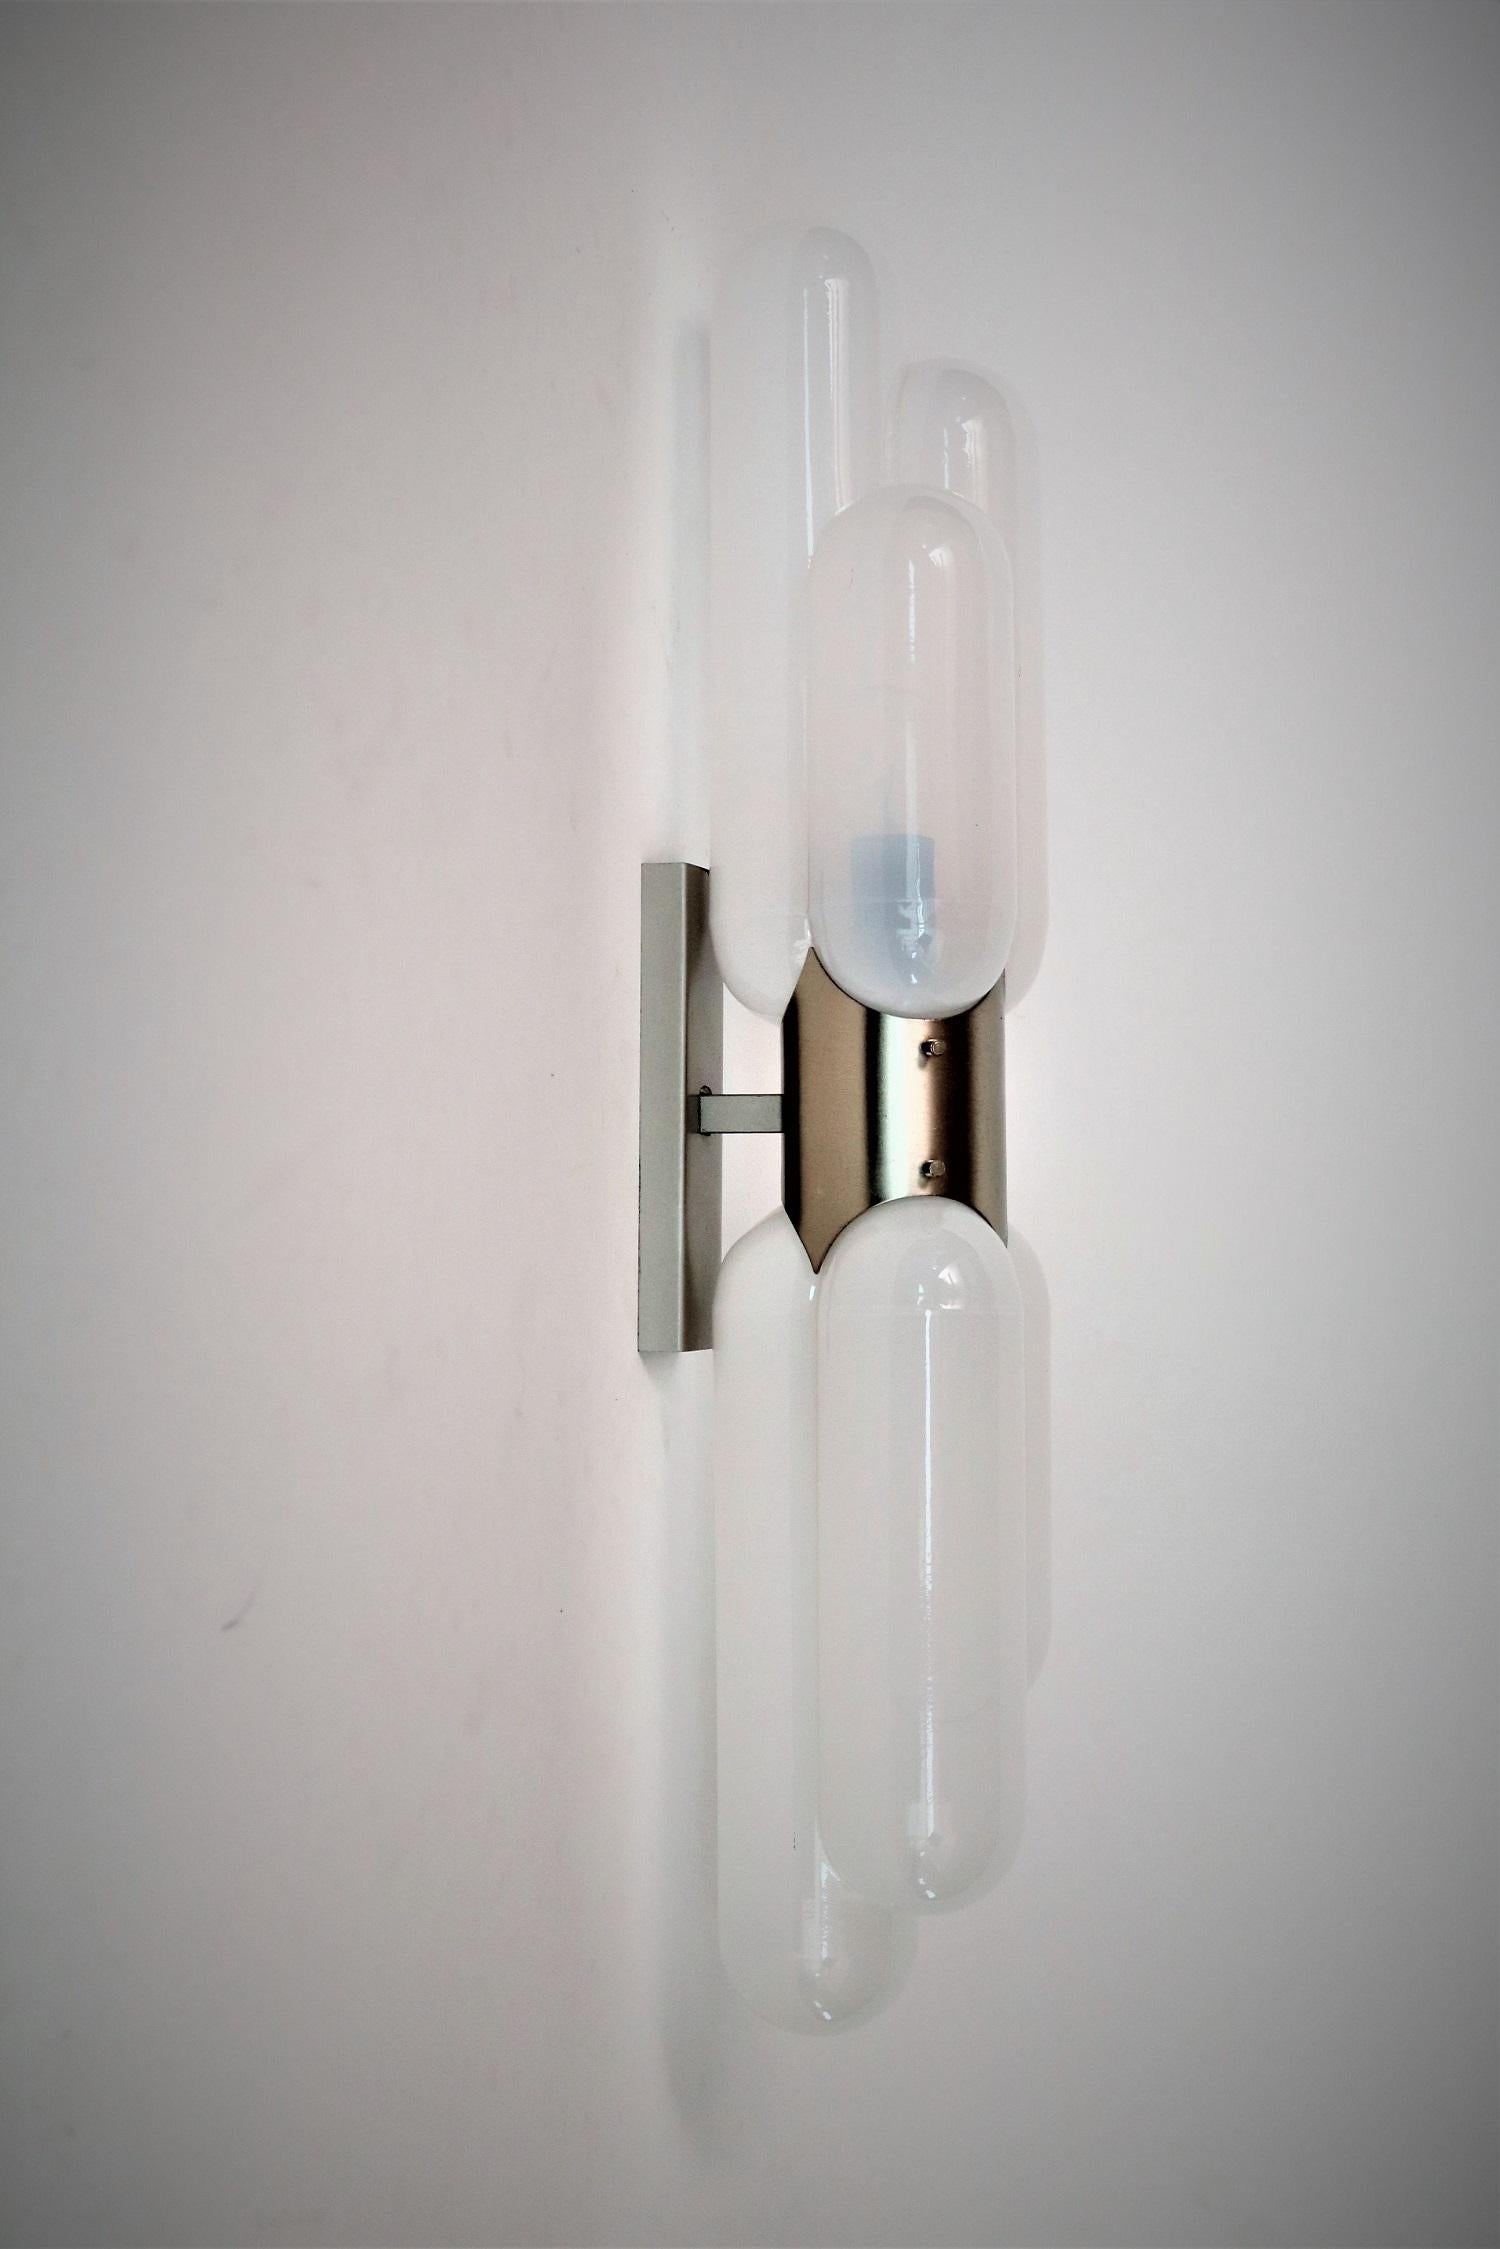 Gorgeous wall sconce made of beautiful opalescent white Murano glass and nickel wall bracket.
Designed by Carlo Nason and manufactured by Mazzega in the 1960s, Italy.
The light is called 